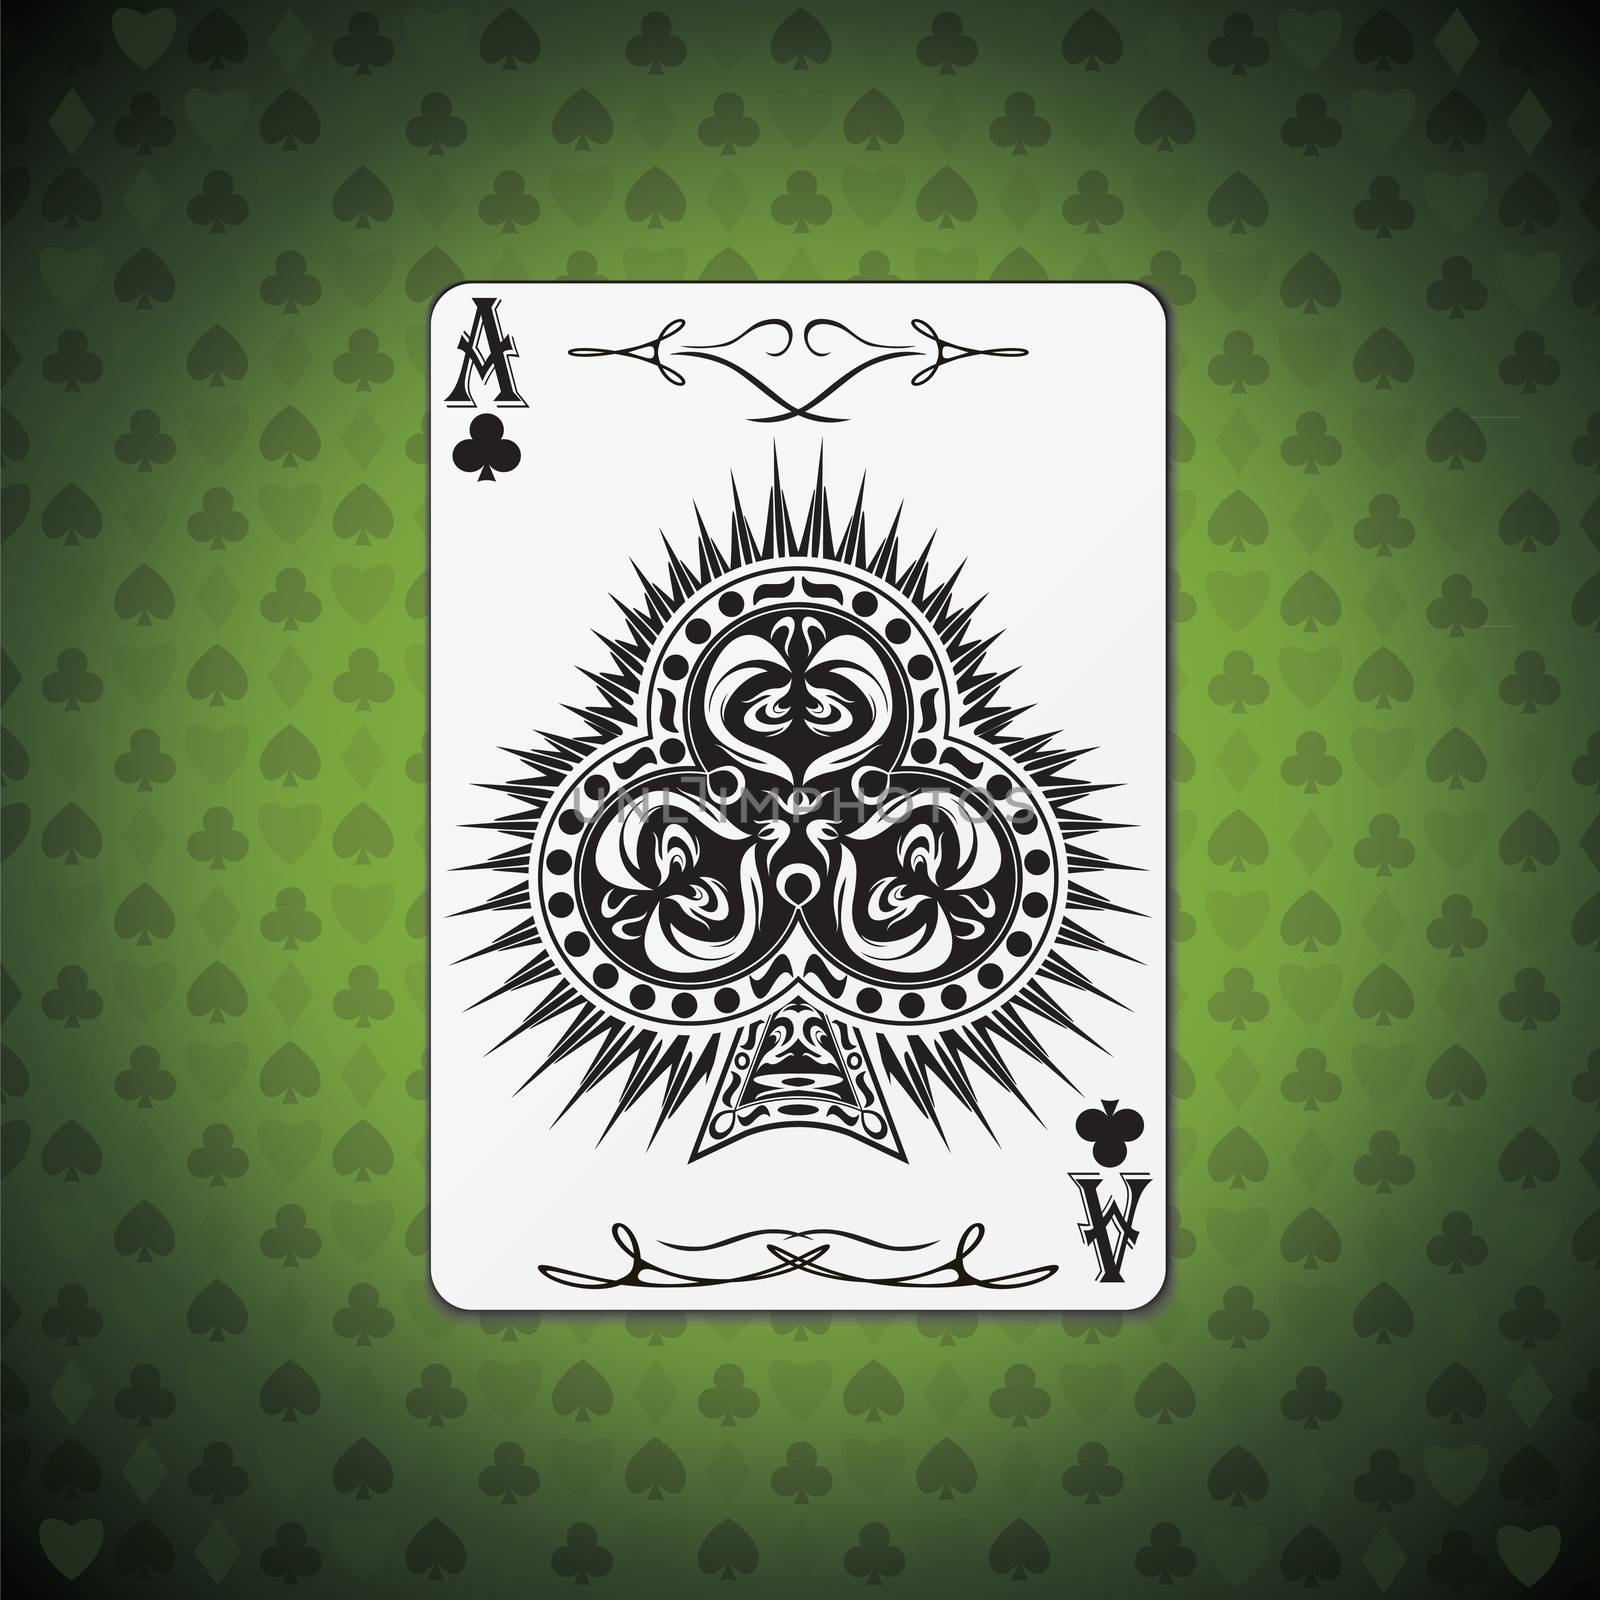 Ace of clubs poker card green background.